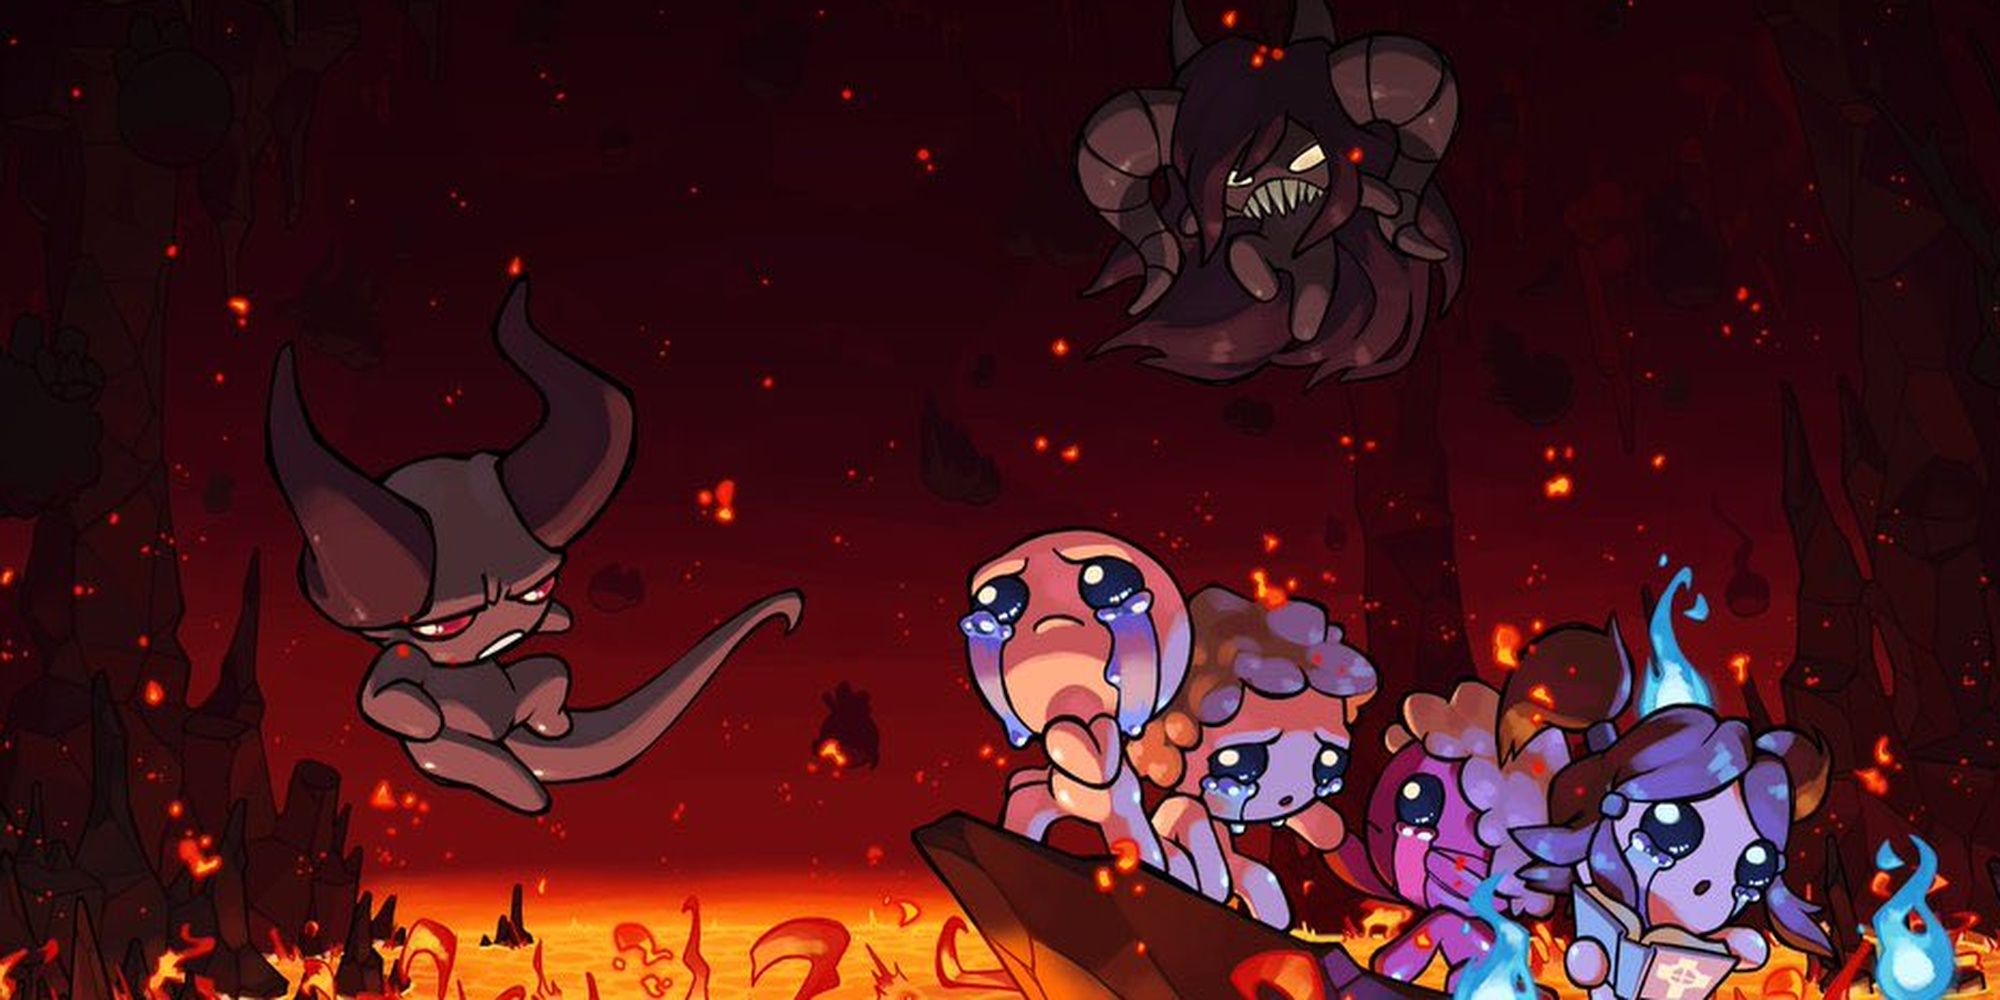 The Binding of Isaac: Repentance. Isaac stands at the edge of a cliff overlooking a lake of fire, defiantly facing a pair of hovering demons. The characters Jacob, Esau, and Bethany are grouped behind him.